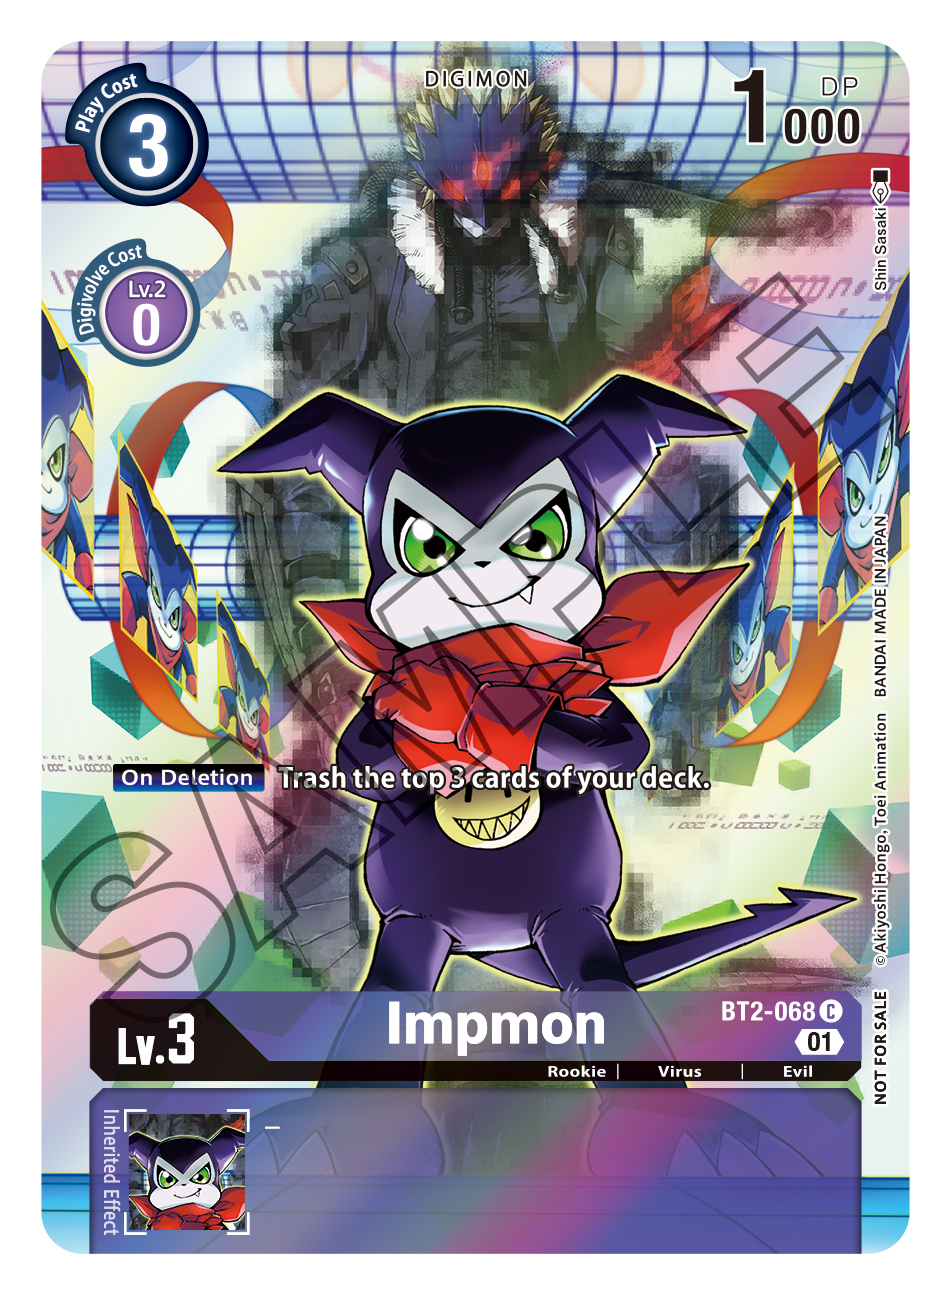 Digimon Card Game Playmat and Card Set 1 -Digimon Tamers-